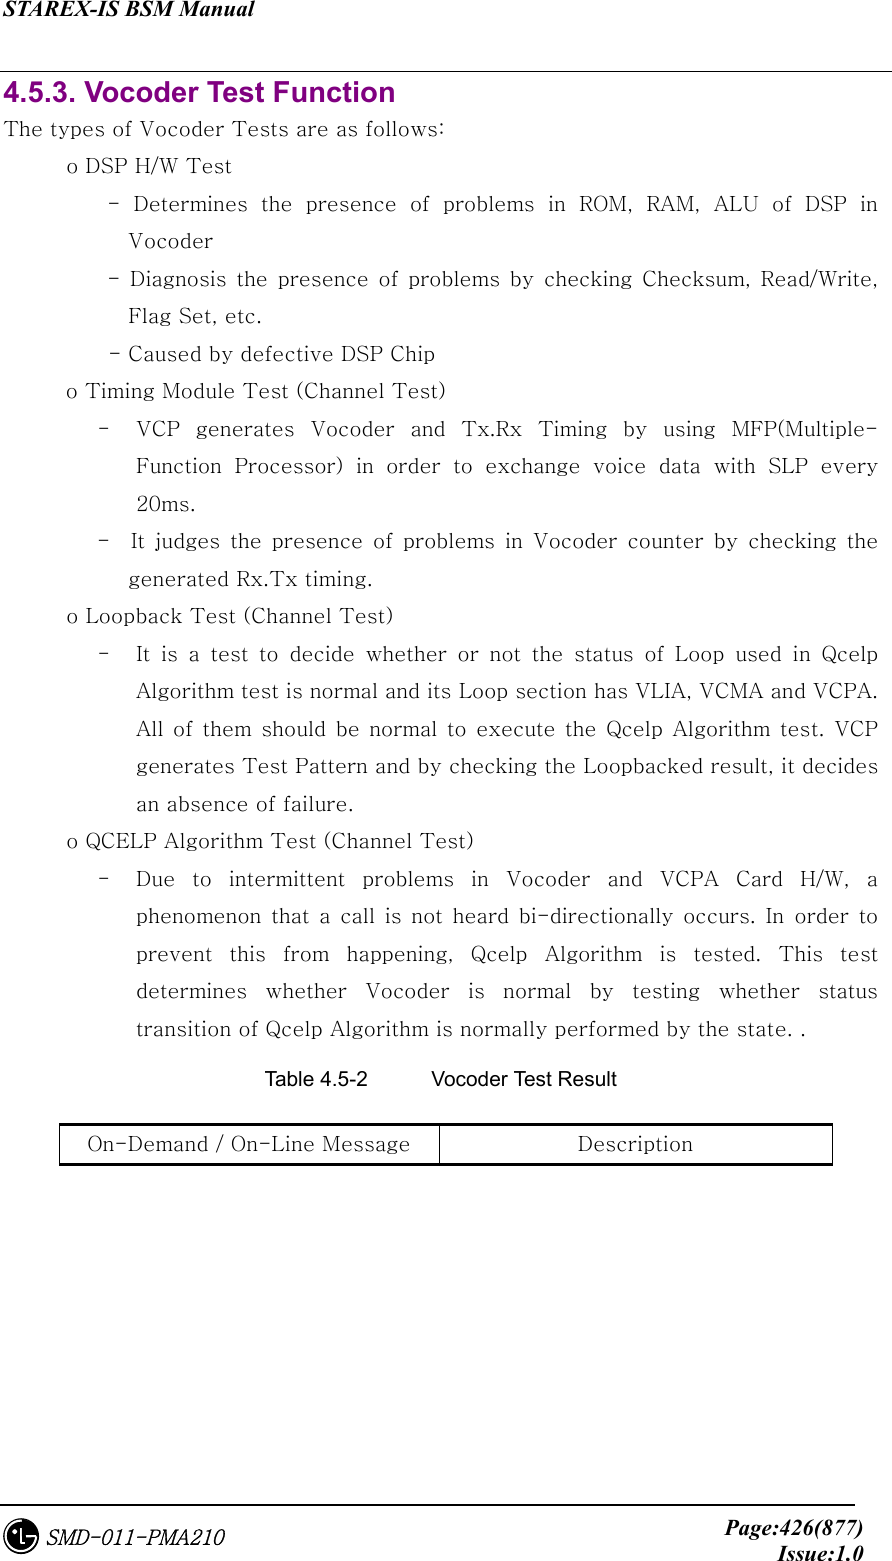 STAREX-IS BSM Manual     Page:426(877)Issue:1.0SMD-011-PMA210 4.5.3. Vocoder Test Function The types of Vocoder Tests are as follows:       o DSP H/W Test            -  Determines  the  presence  of  problems  in  ROM,  RAM,  ALU  of  DSP  in Vocoder             - Diagnosis the presence of problems by checking Checksum,  Read/Write, Flag Set, etc.           - Caused by defective DSP Chip o Timing Module Test (Channel Test) -  VCP generates Vocoder and Tx.Rx Timing by using MFP(Multiple-Function Processor) in order to exchange voice data with SLP every 20ms.            -  It judges the presence of problems in Vocoder counter  by  checking  the generated Rx.Tx timing.       o Loopback Test (Channel Test) -  It is a test to decide whether or not the status of Loop used in  Qcelp Algorithm test is normal and its Loop section has VLIA, VCMA and VCPA. All  of them  should  be  normal  to  execute the  Qcelp  Algorithm test.  VCP generates Test Pattern and by checking the Loopbacked result, it decides an absence of failure.       o QCELP Algorithm Test (Channel Test) -  Due to intermittent problems in Vocoder and VCPA Card H/W, a phenomenon that a call is not heard bi-directionally occurs. In order to prevent this from happening, Qcelp Algorithm is tested. This test determines  whether  Vocoder  is  normal  by  testing  whether  status transition of Qcelp Algorithm is normally performed by the state. .   Table 4.5-2  Vocoder Test Result On-Demand / On-Line Message  Description 